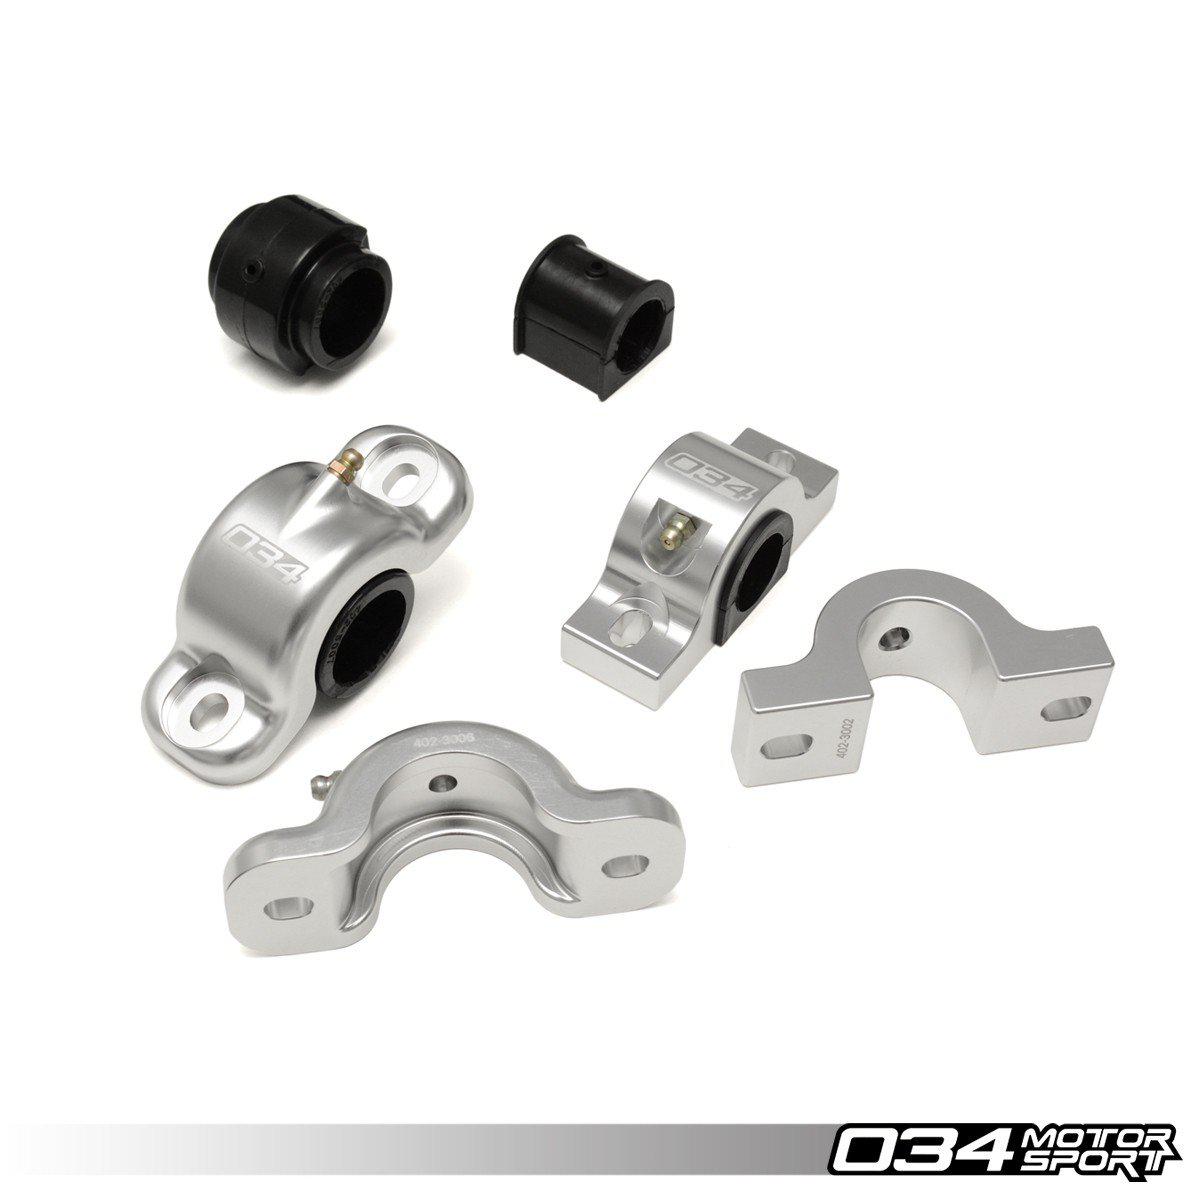 034Motorsport Dynamic+ Sway Bar Kit, B9 Audi A4/S4, A5/S5/RS5, Allroad-A Little Tuning Co